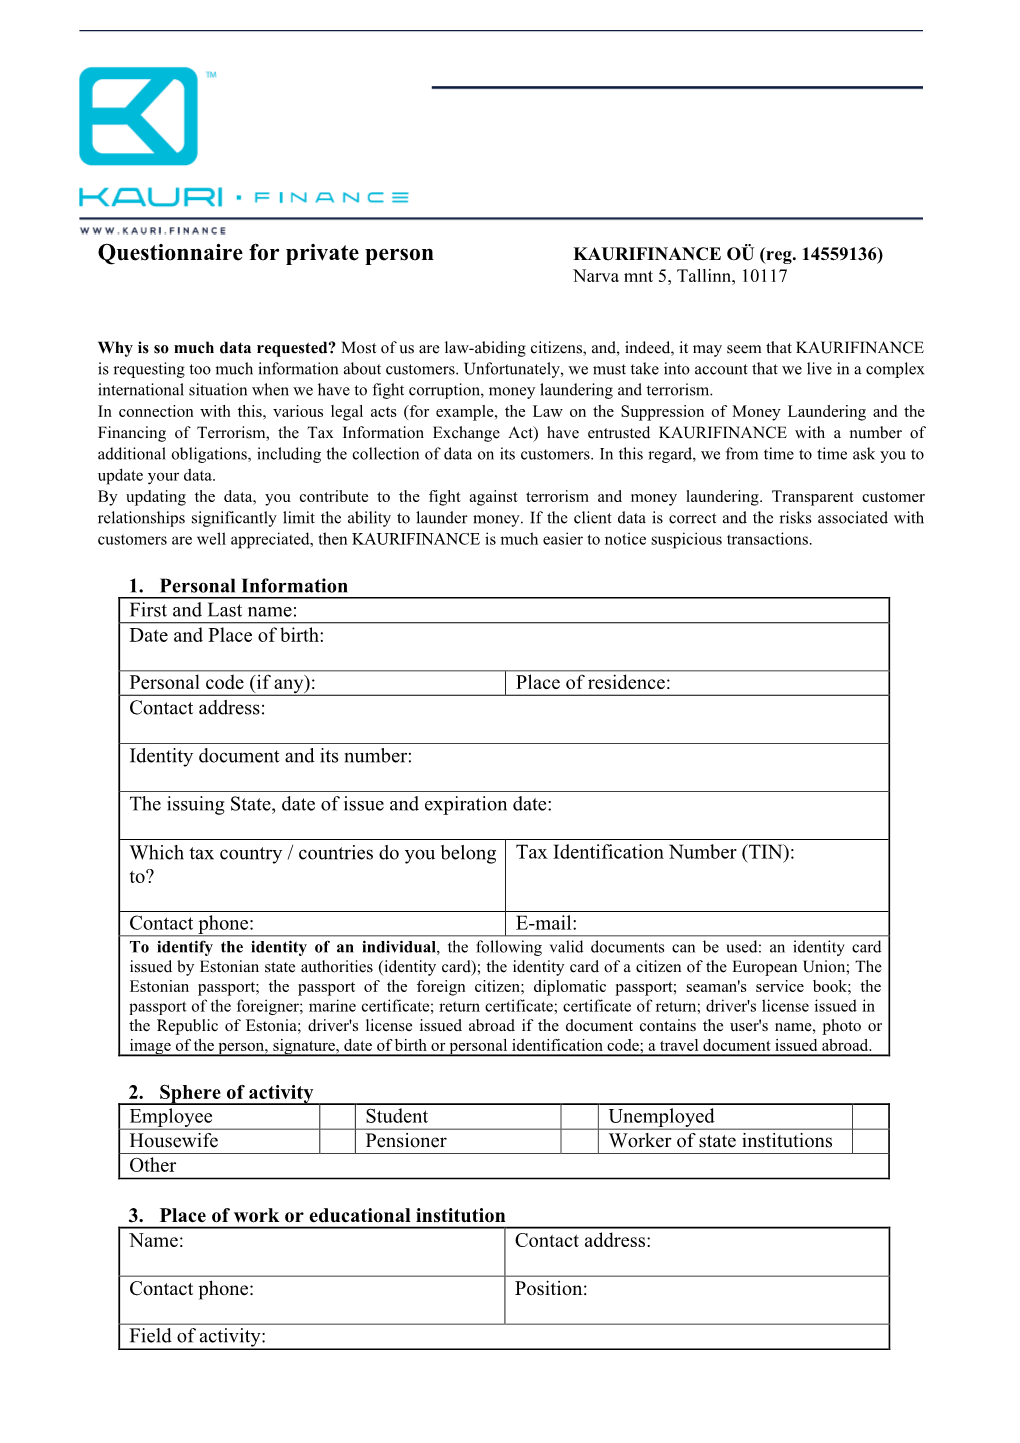 Questionnaire for Private Person KAURIFINANCE OÜ (Reg